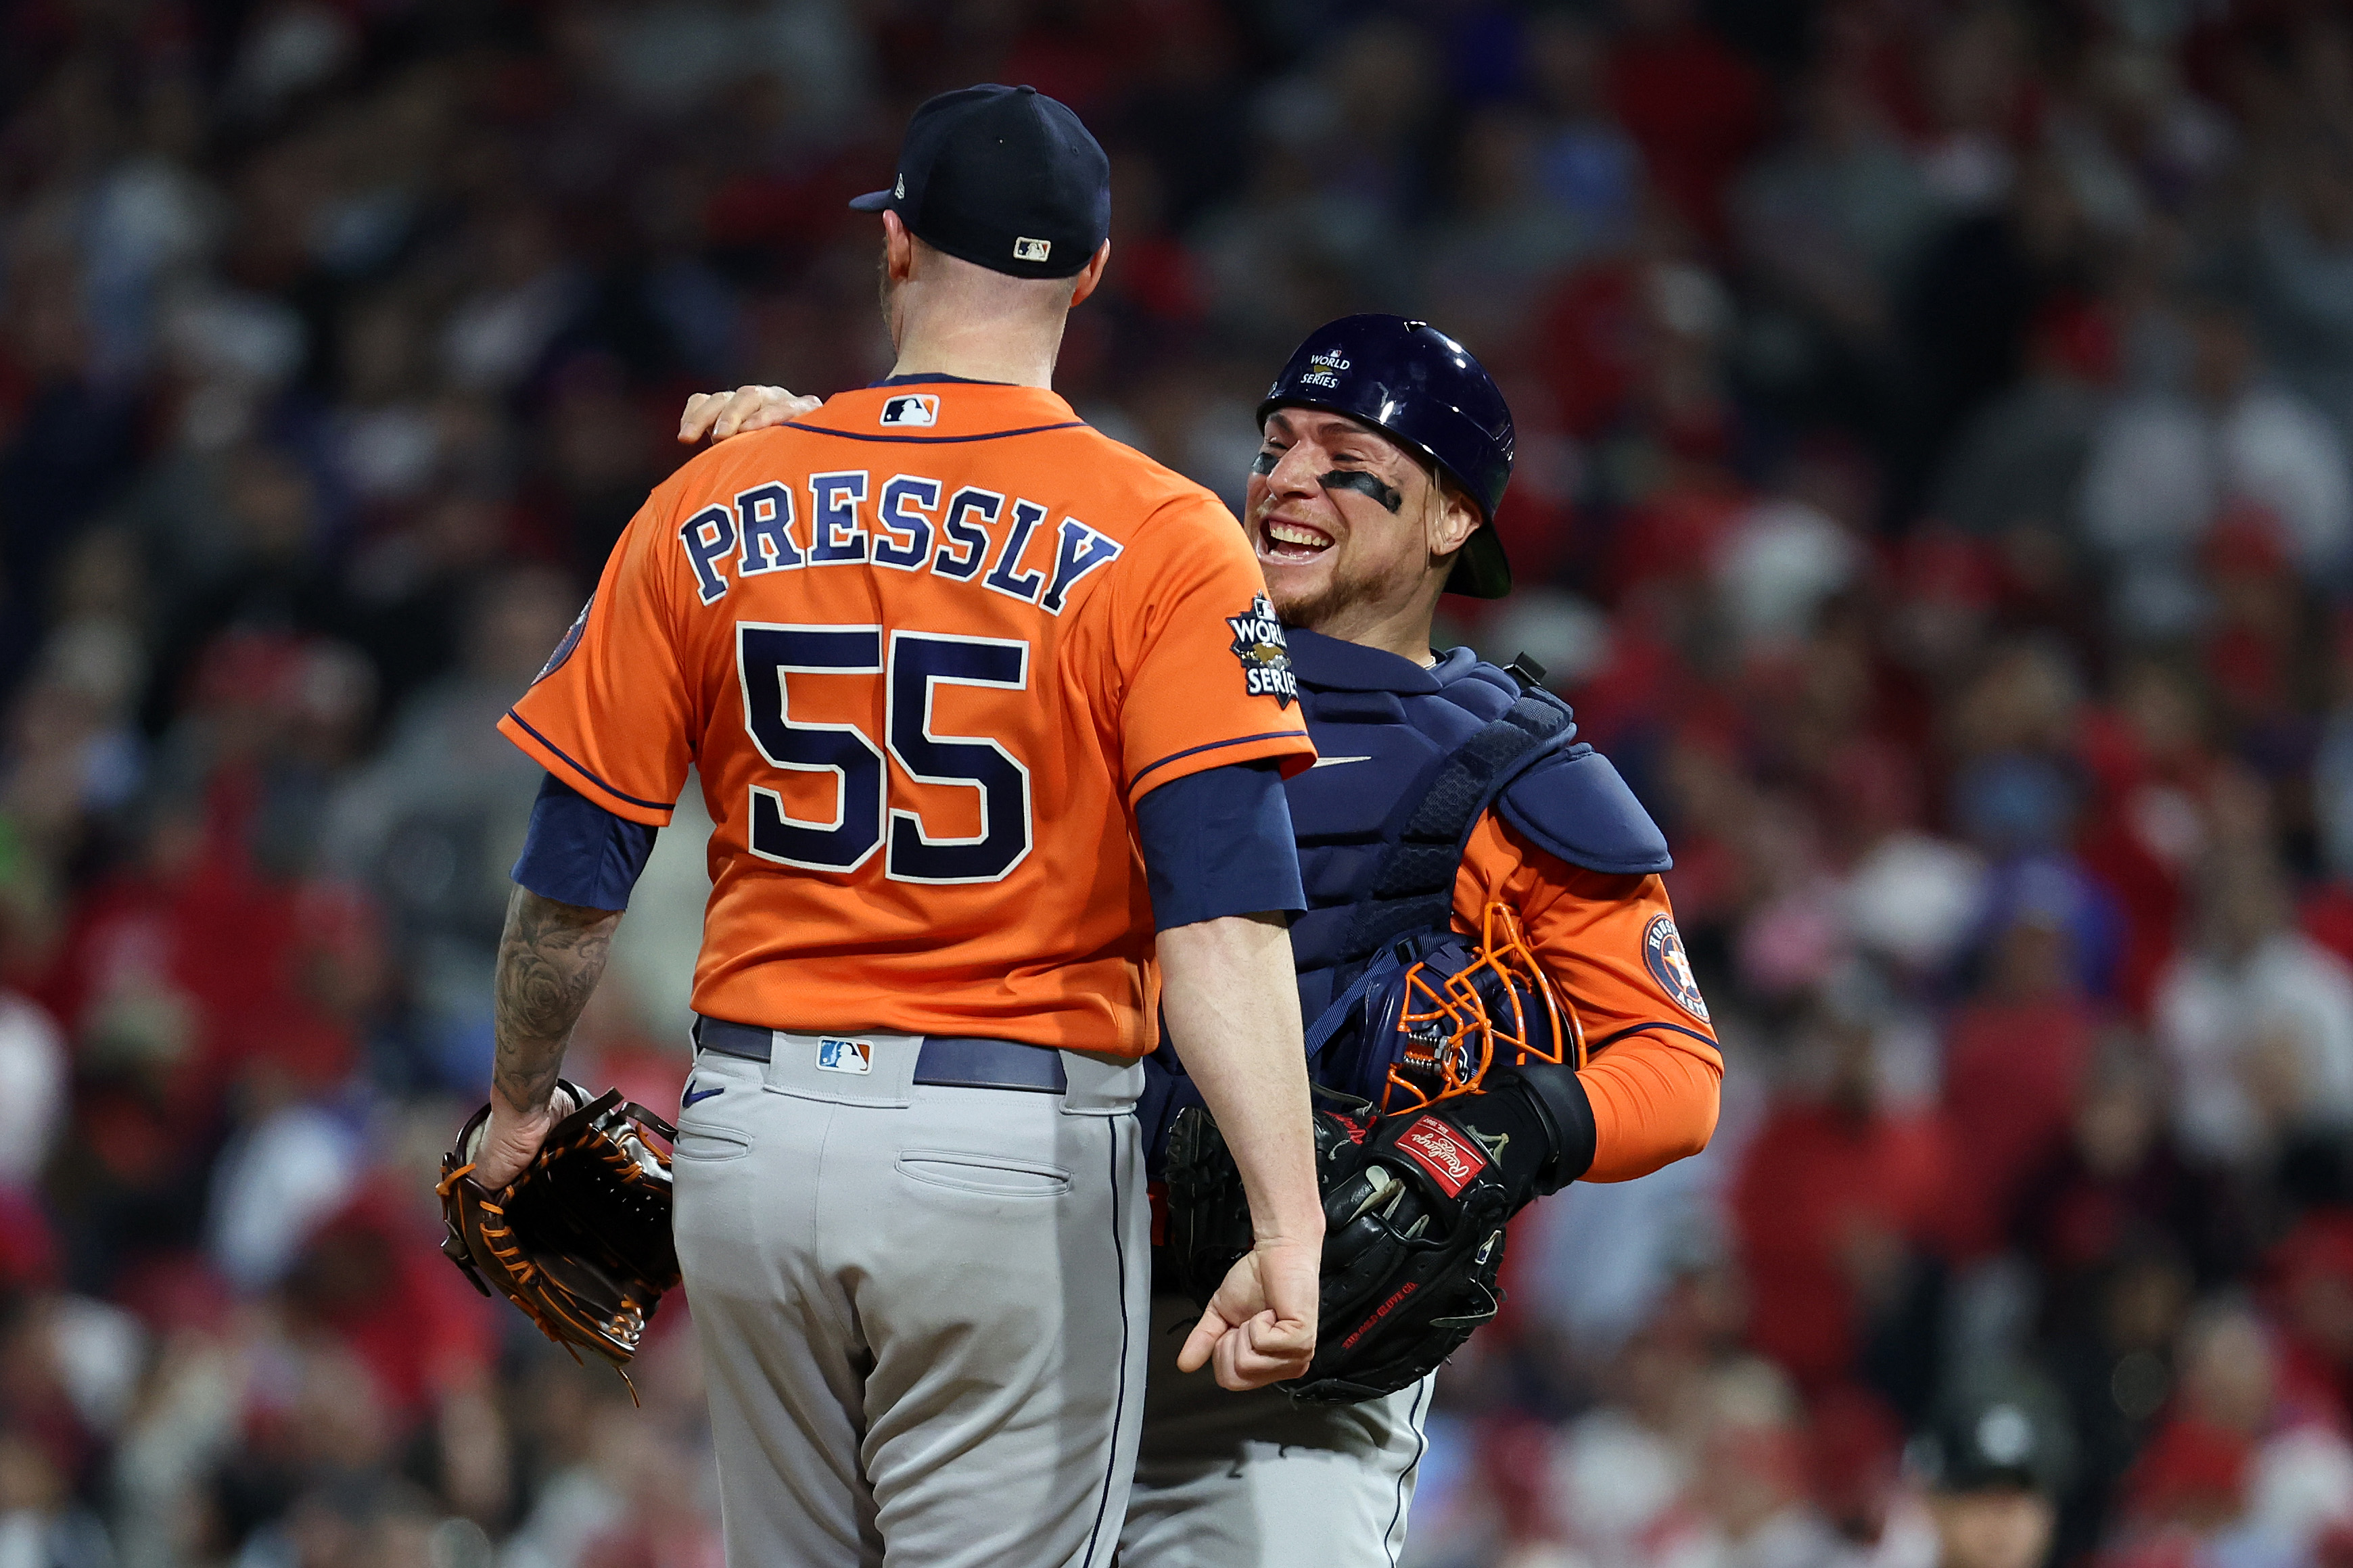 Video Astros played for Christian Vázquez's World Series ring moment